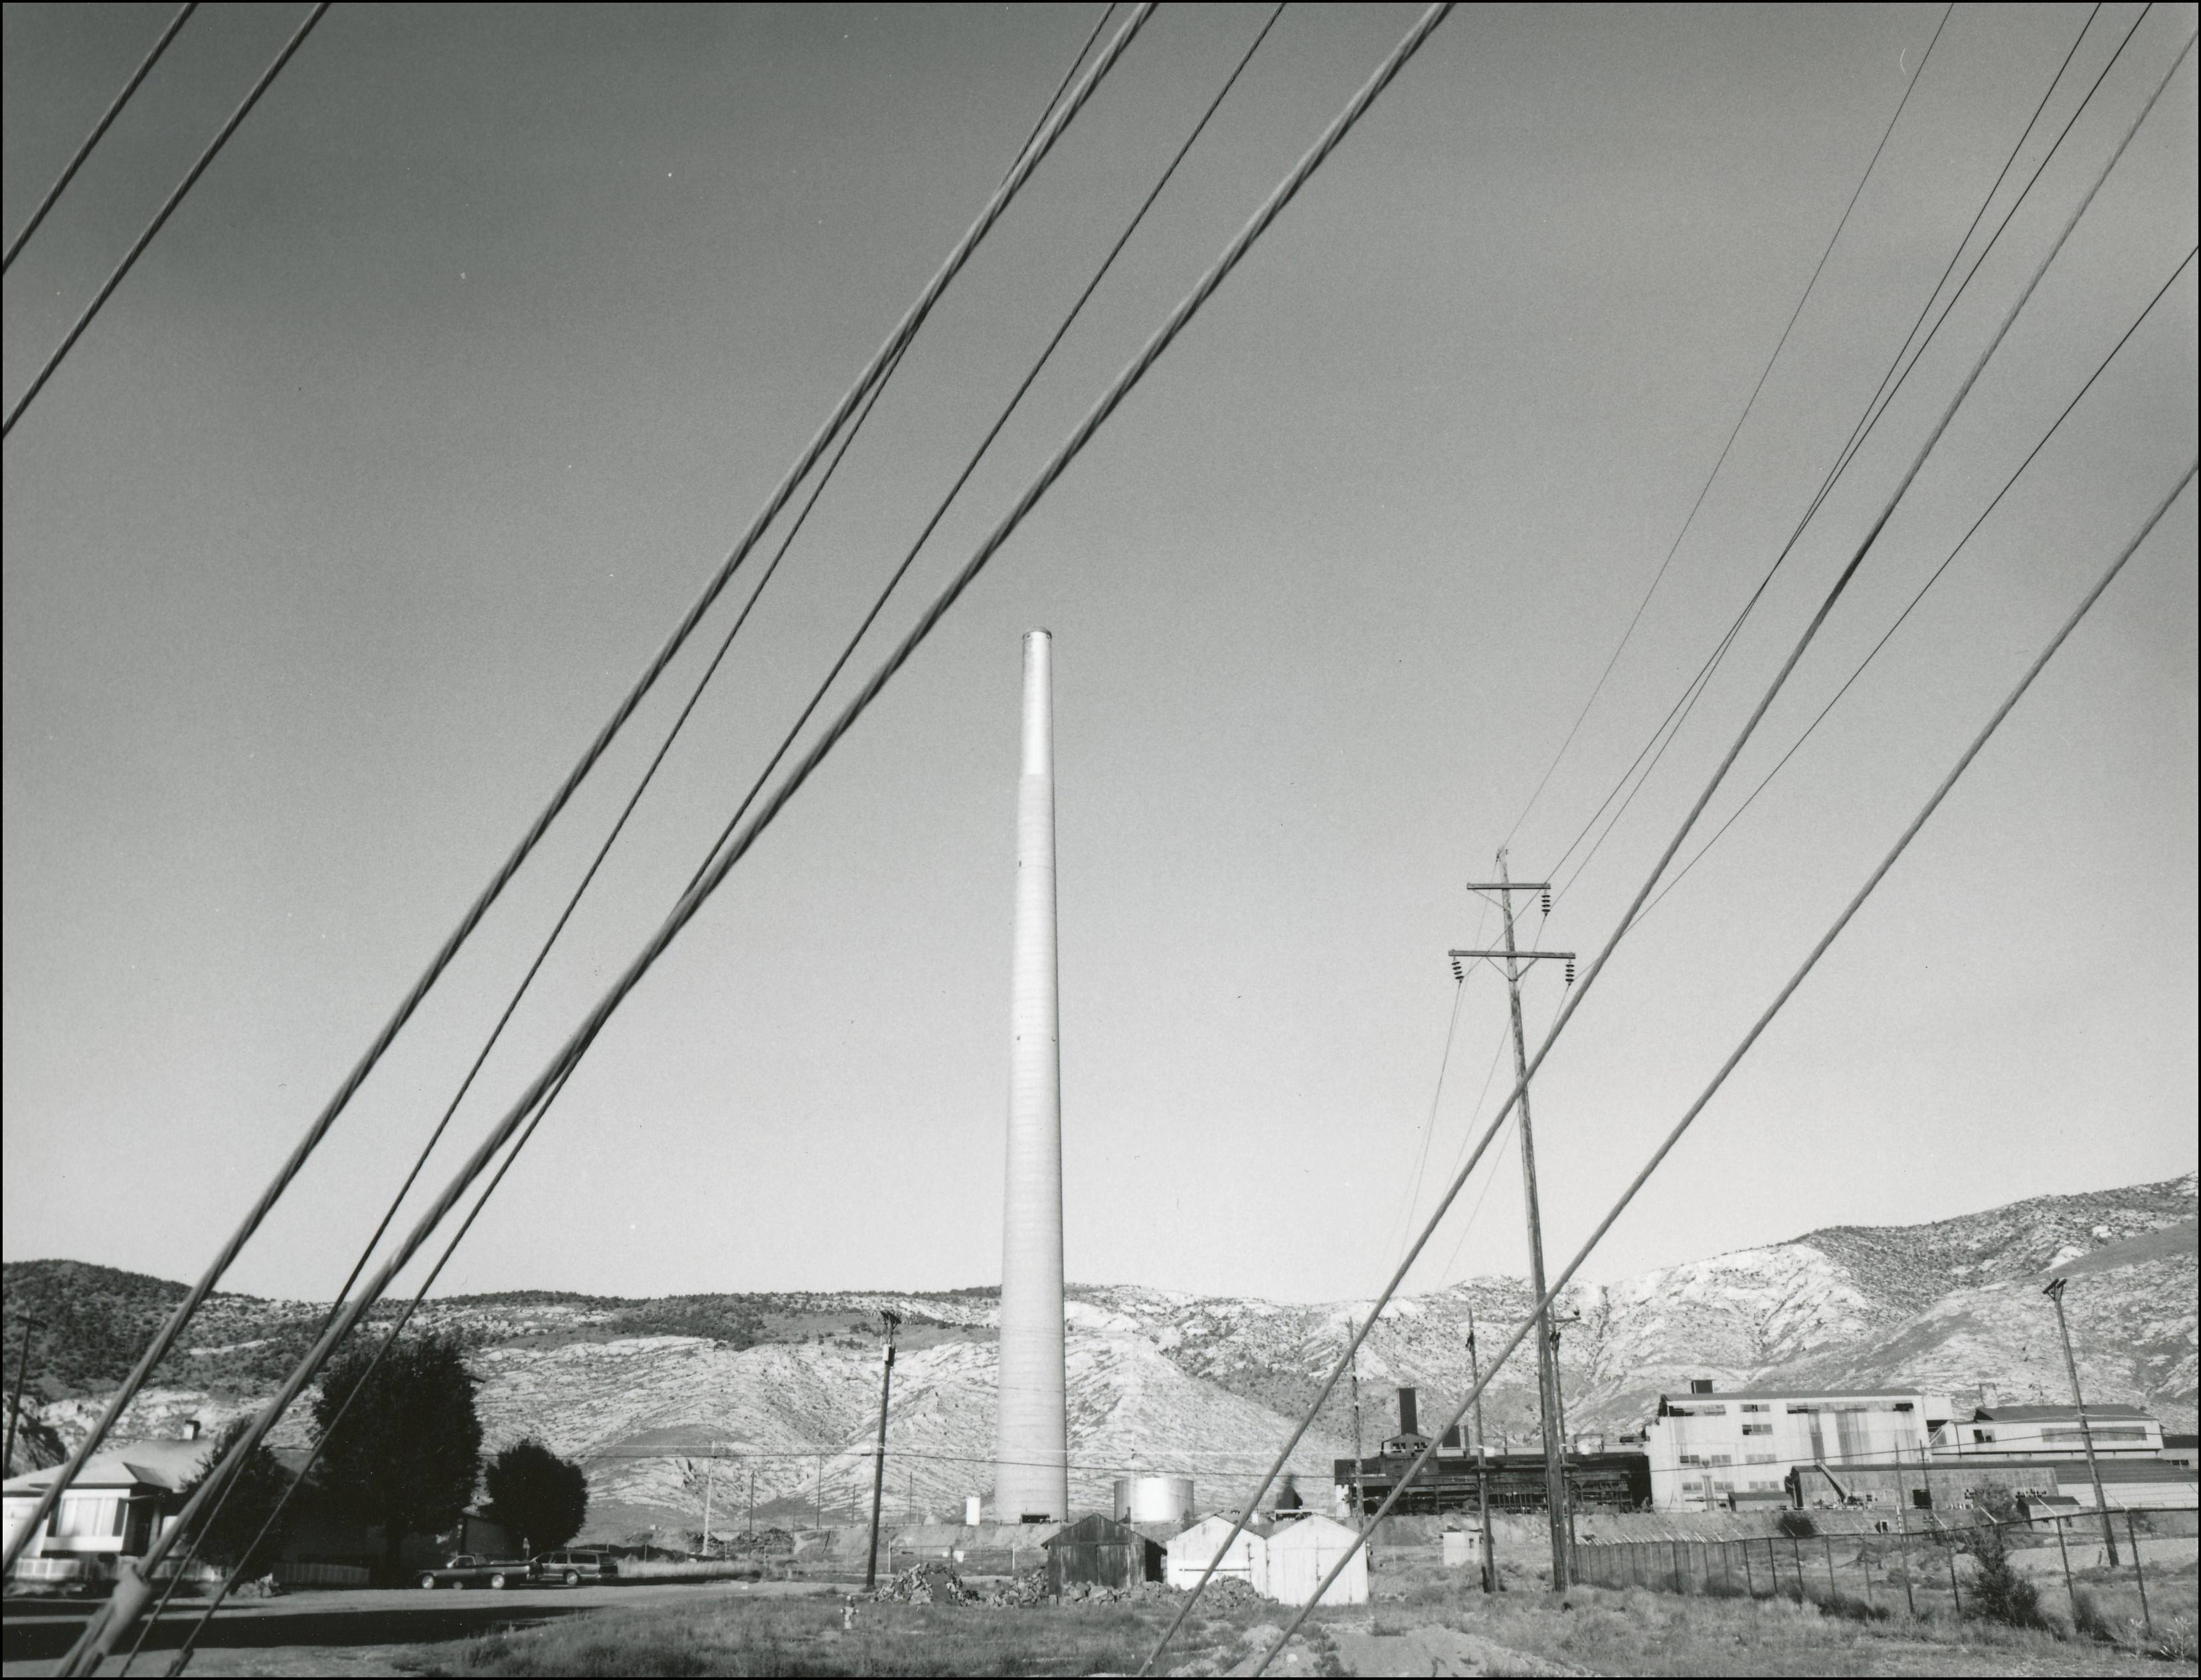 View through power lines of tall smokestack. A few houses and buildings are in surrounding area.